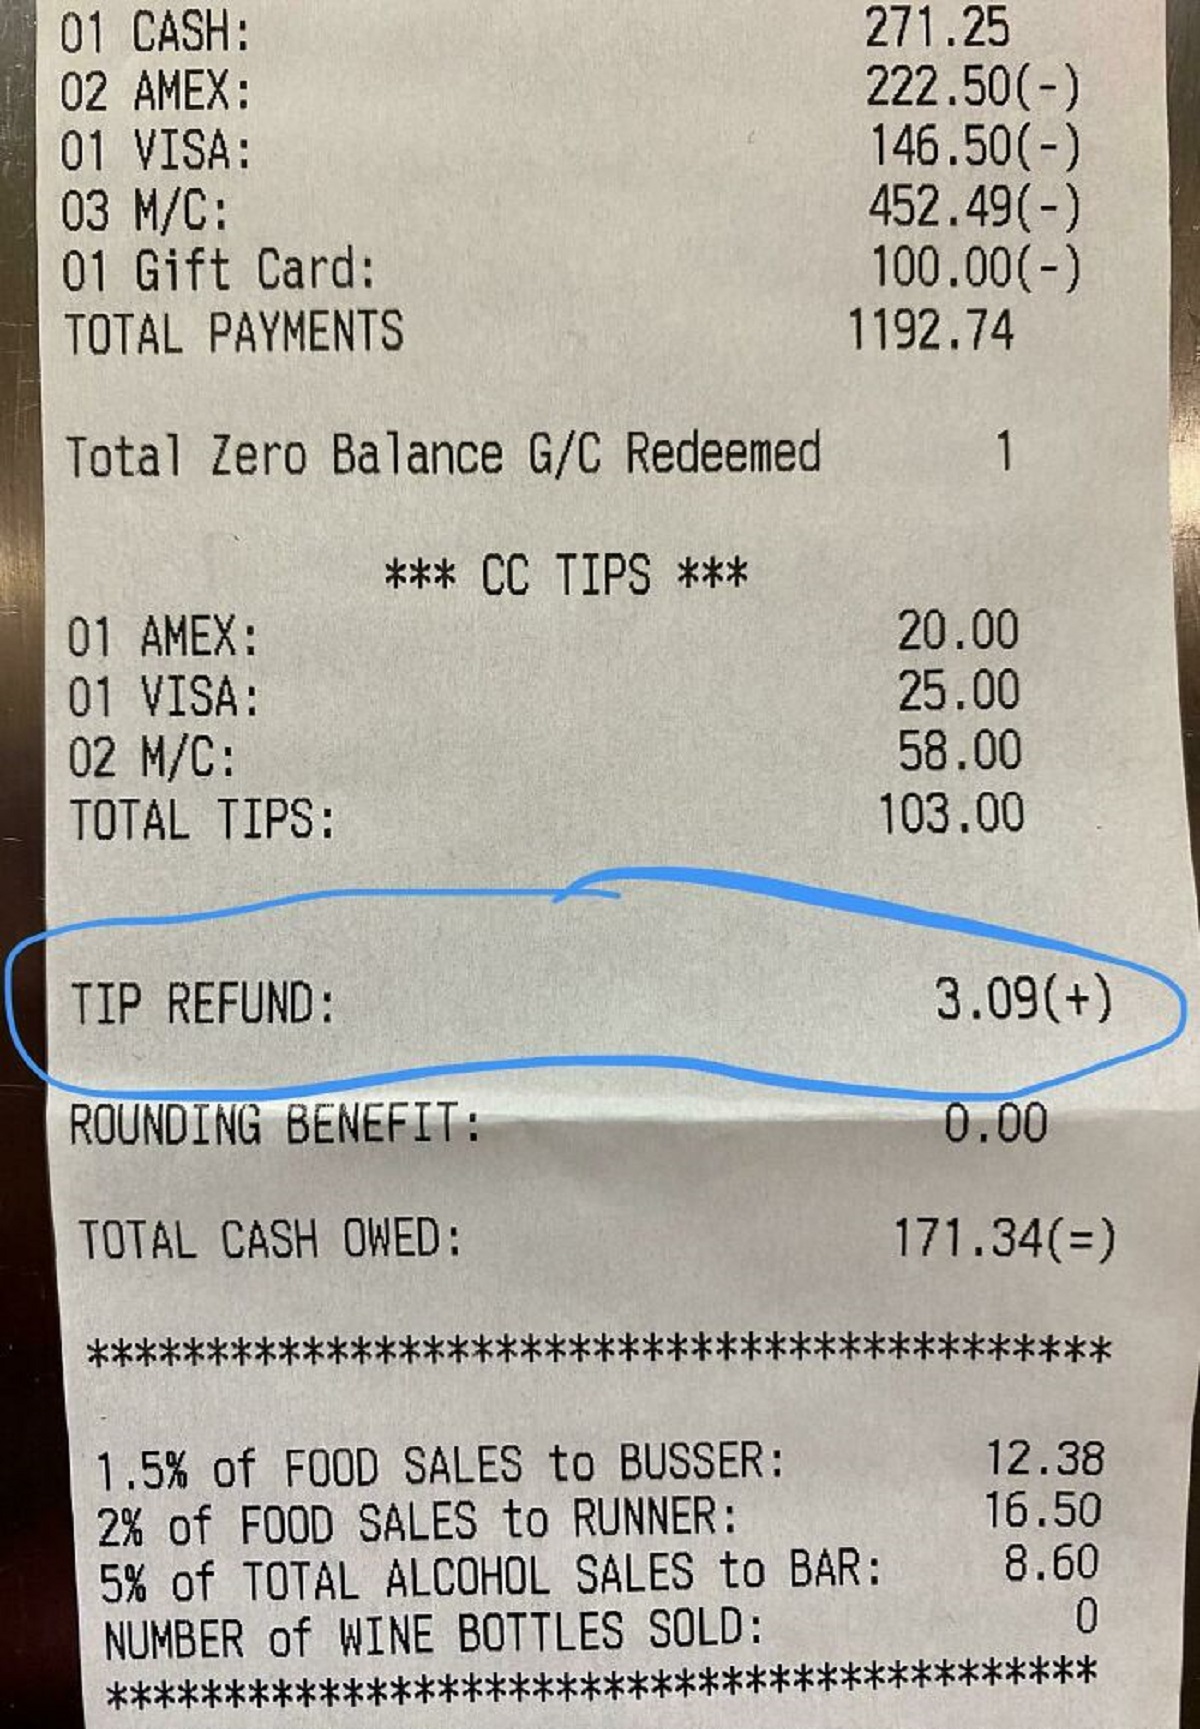 bad customers -  restaurant refund receipt - 01 Cash 02 Amex 01 Visa 03 MC 01 Gift Card Total Payments Total Zero Balance GC Redeemed 01 Amex 01 Visa 02 MC Total Tips Tip Refund Cc Tips Rounding Benefit Total Cash Owed 271.25 222.50 146.50 452.49 100.00 1